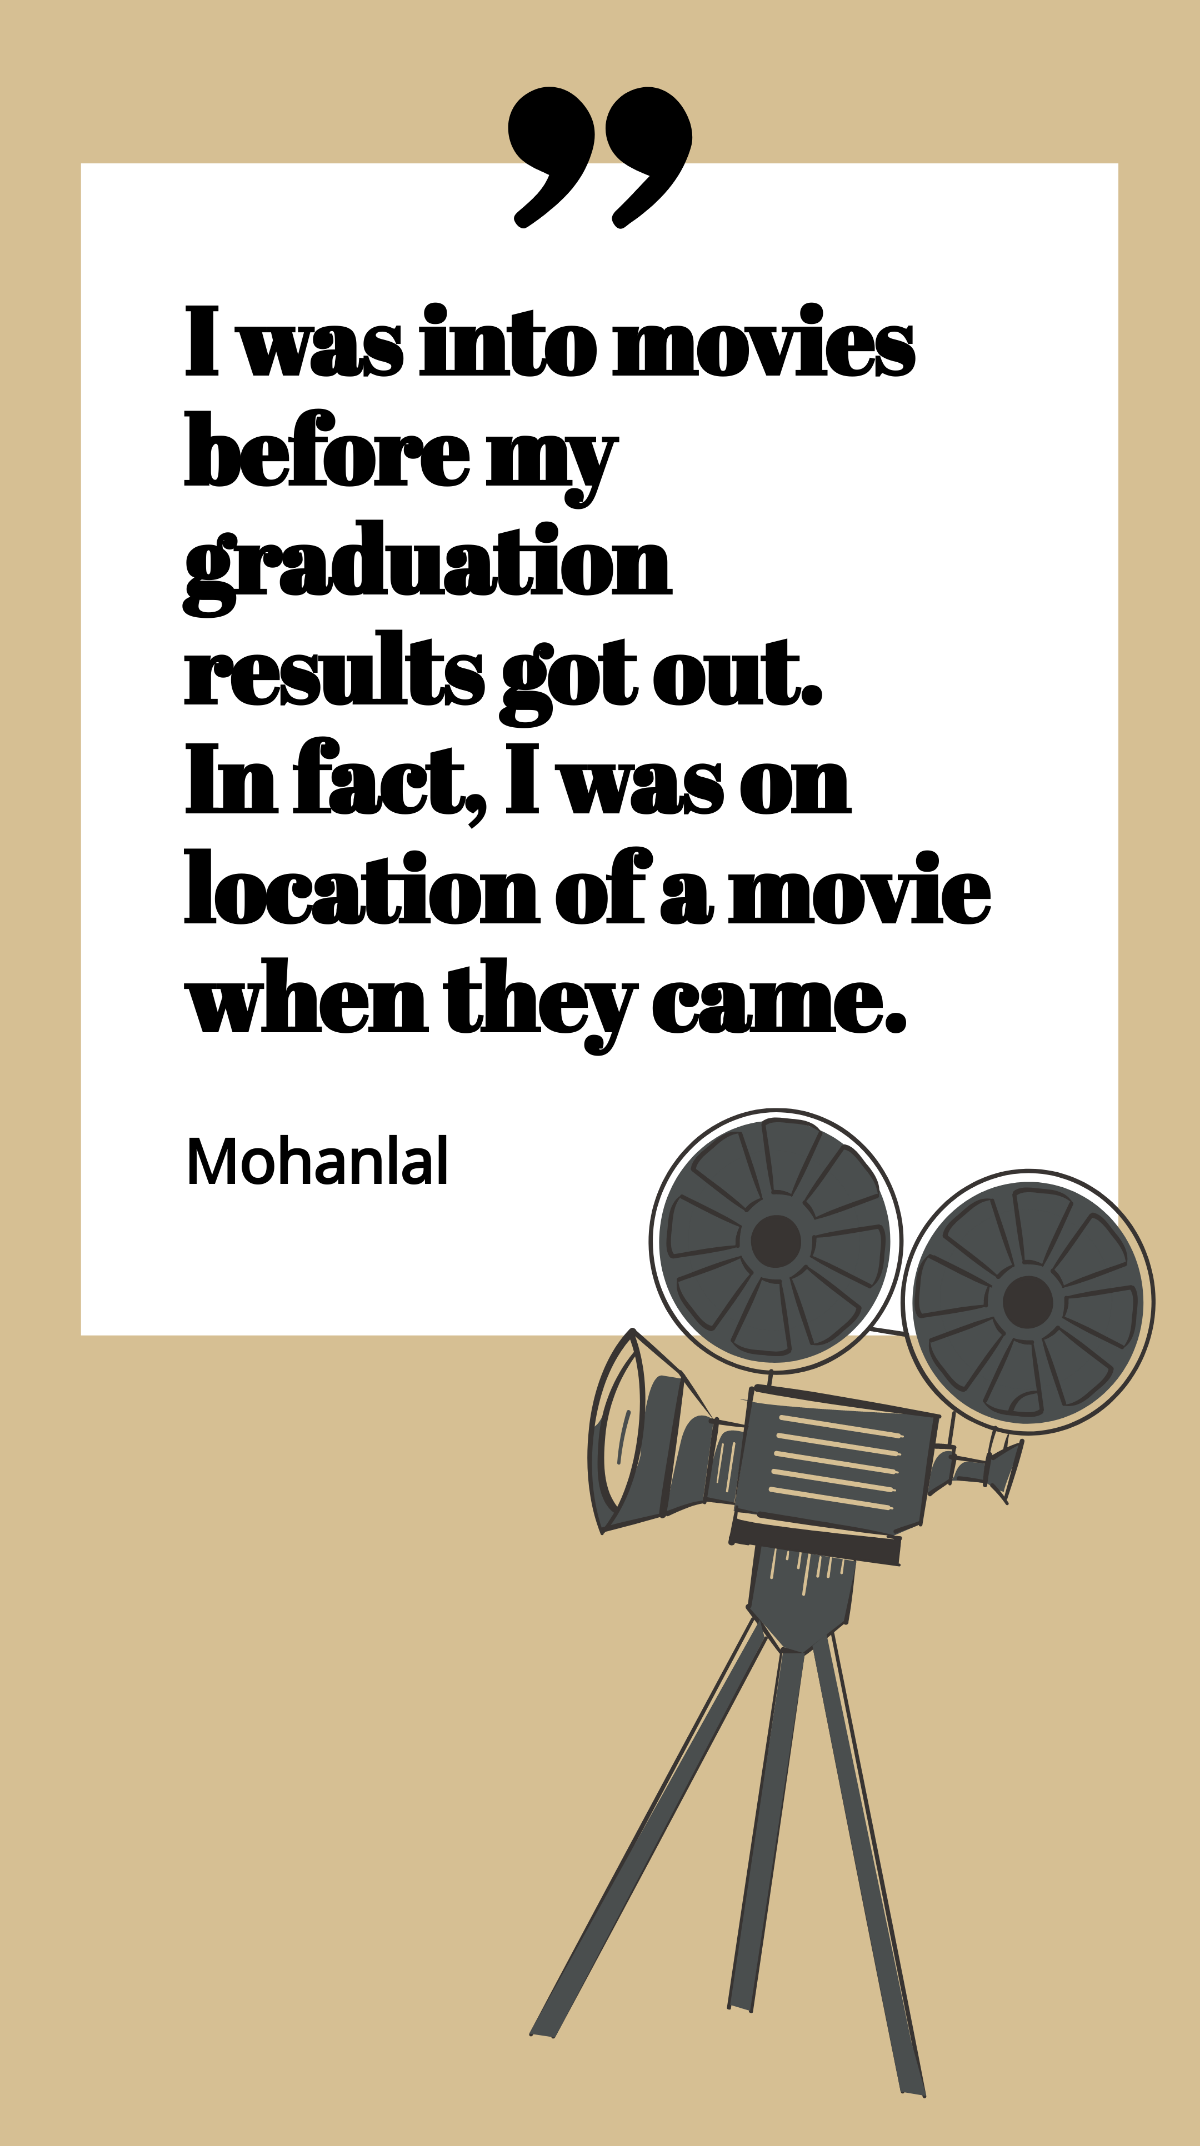 Free Mohanlal - I was into movies before my graduation results got out. In fact, I was on location of a movie when they came. Template